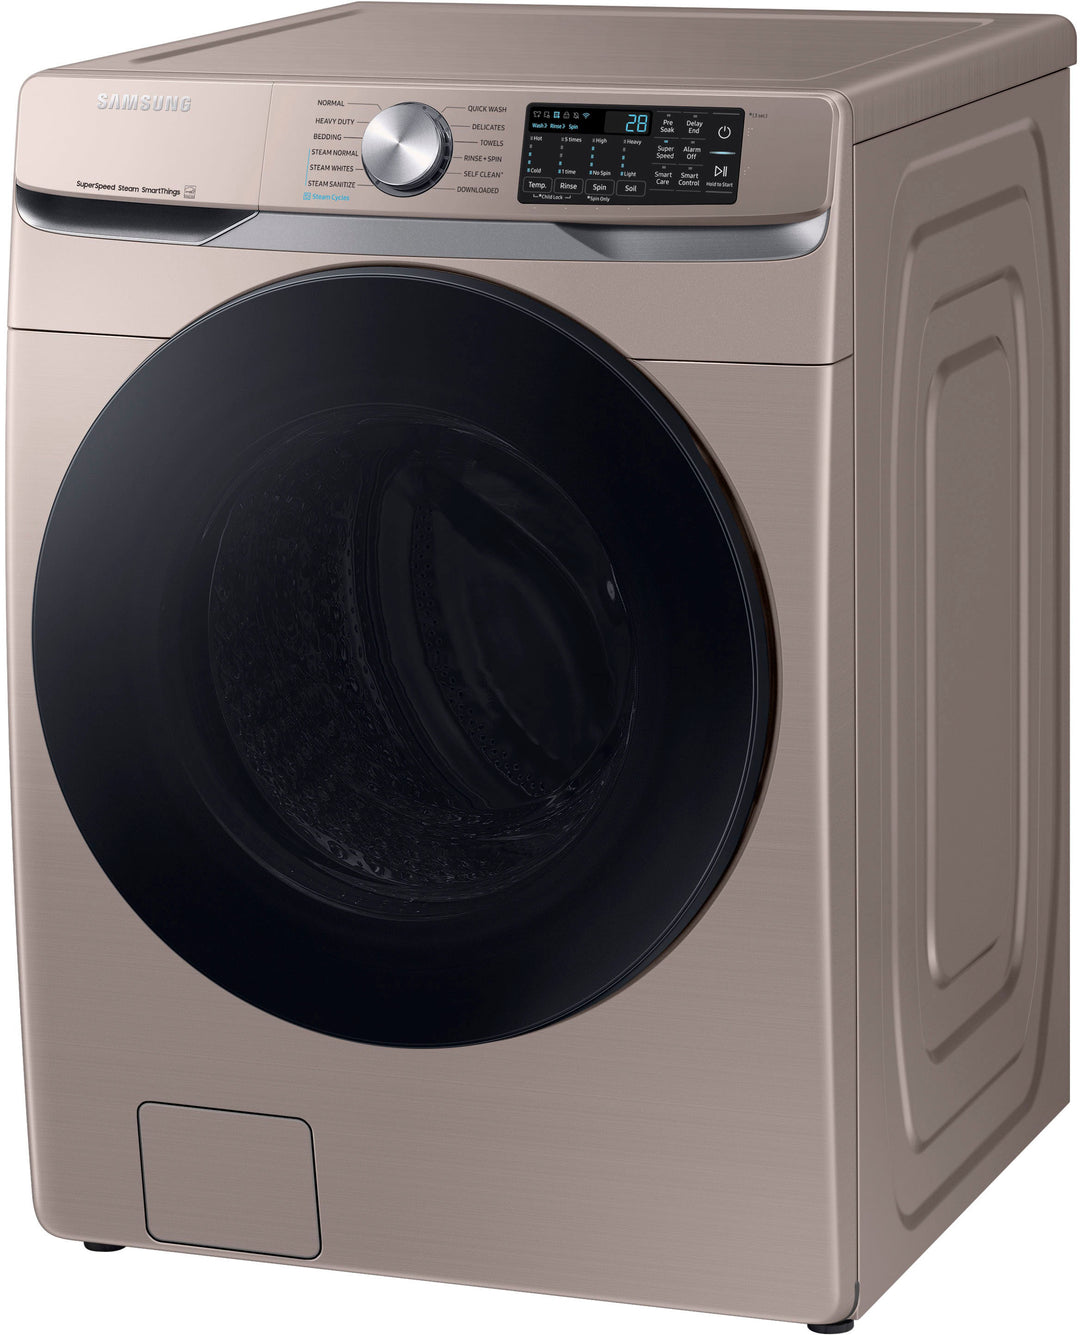 Samsung - 4.5 cu. ft. Large Capacity Smart Front Load Washer with Super Speed Wash - Champagne_12